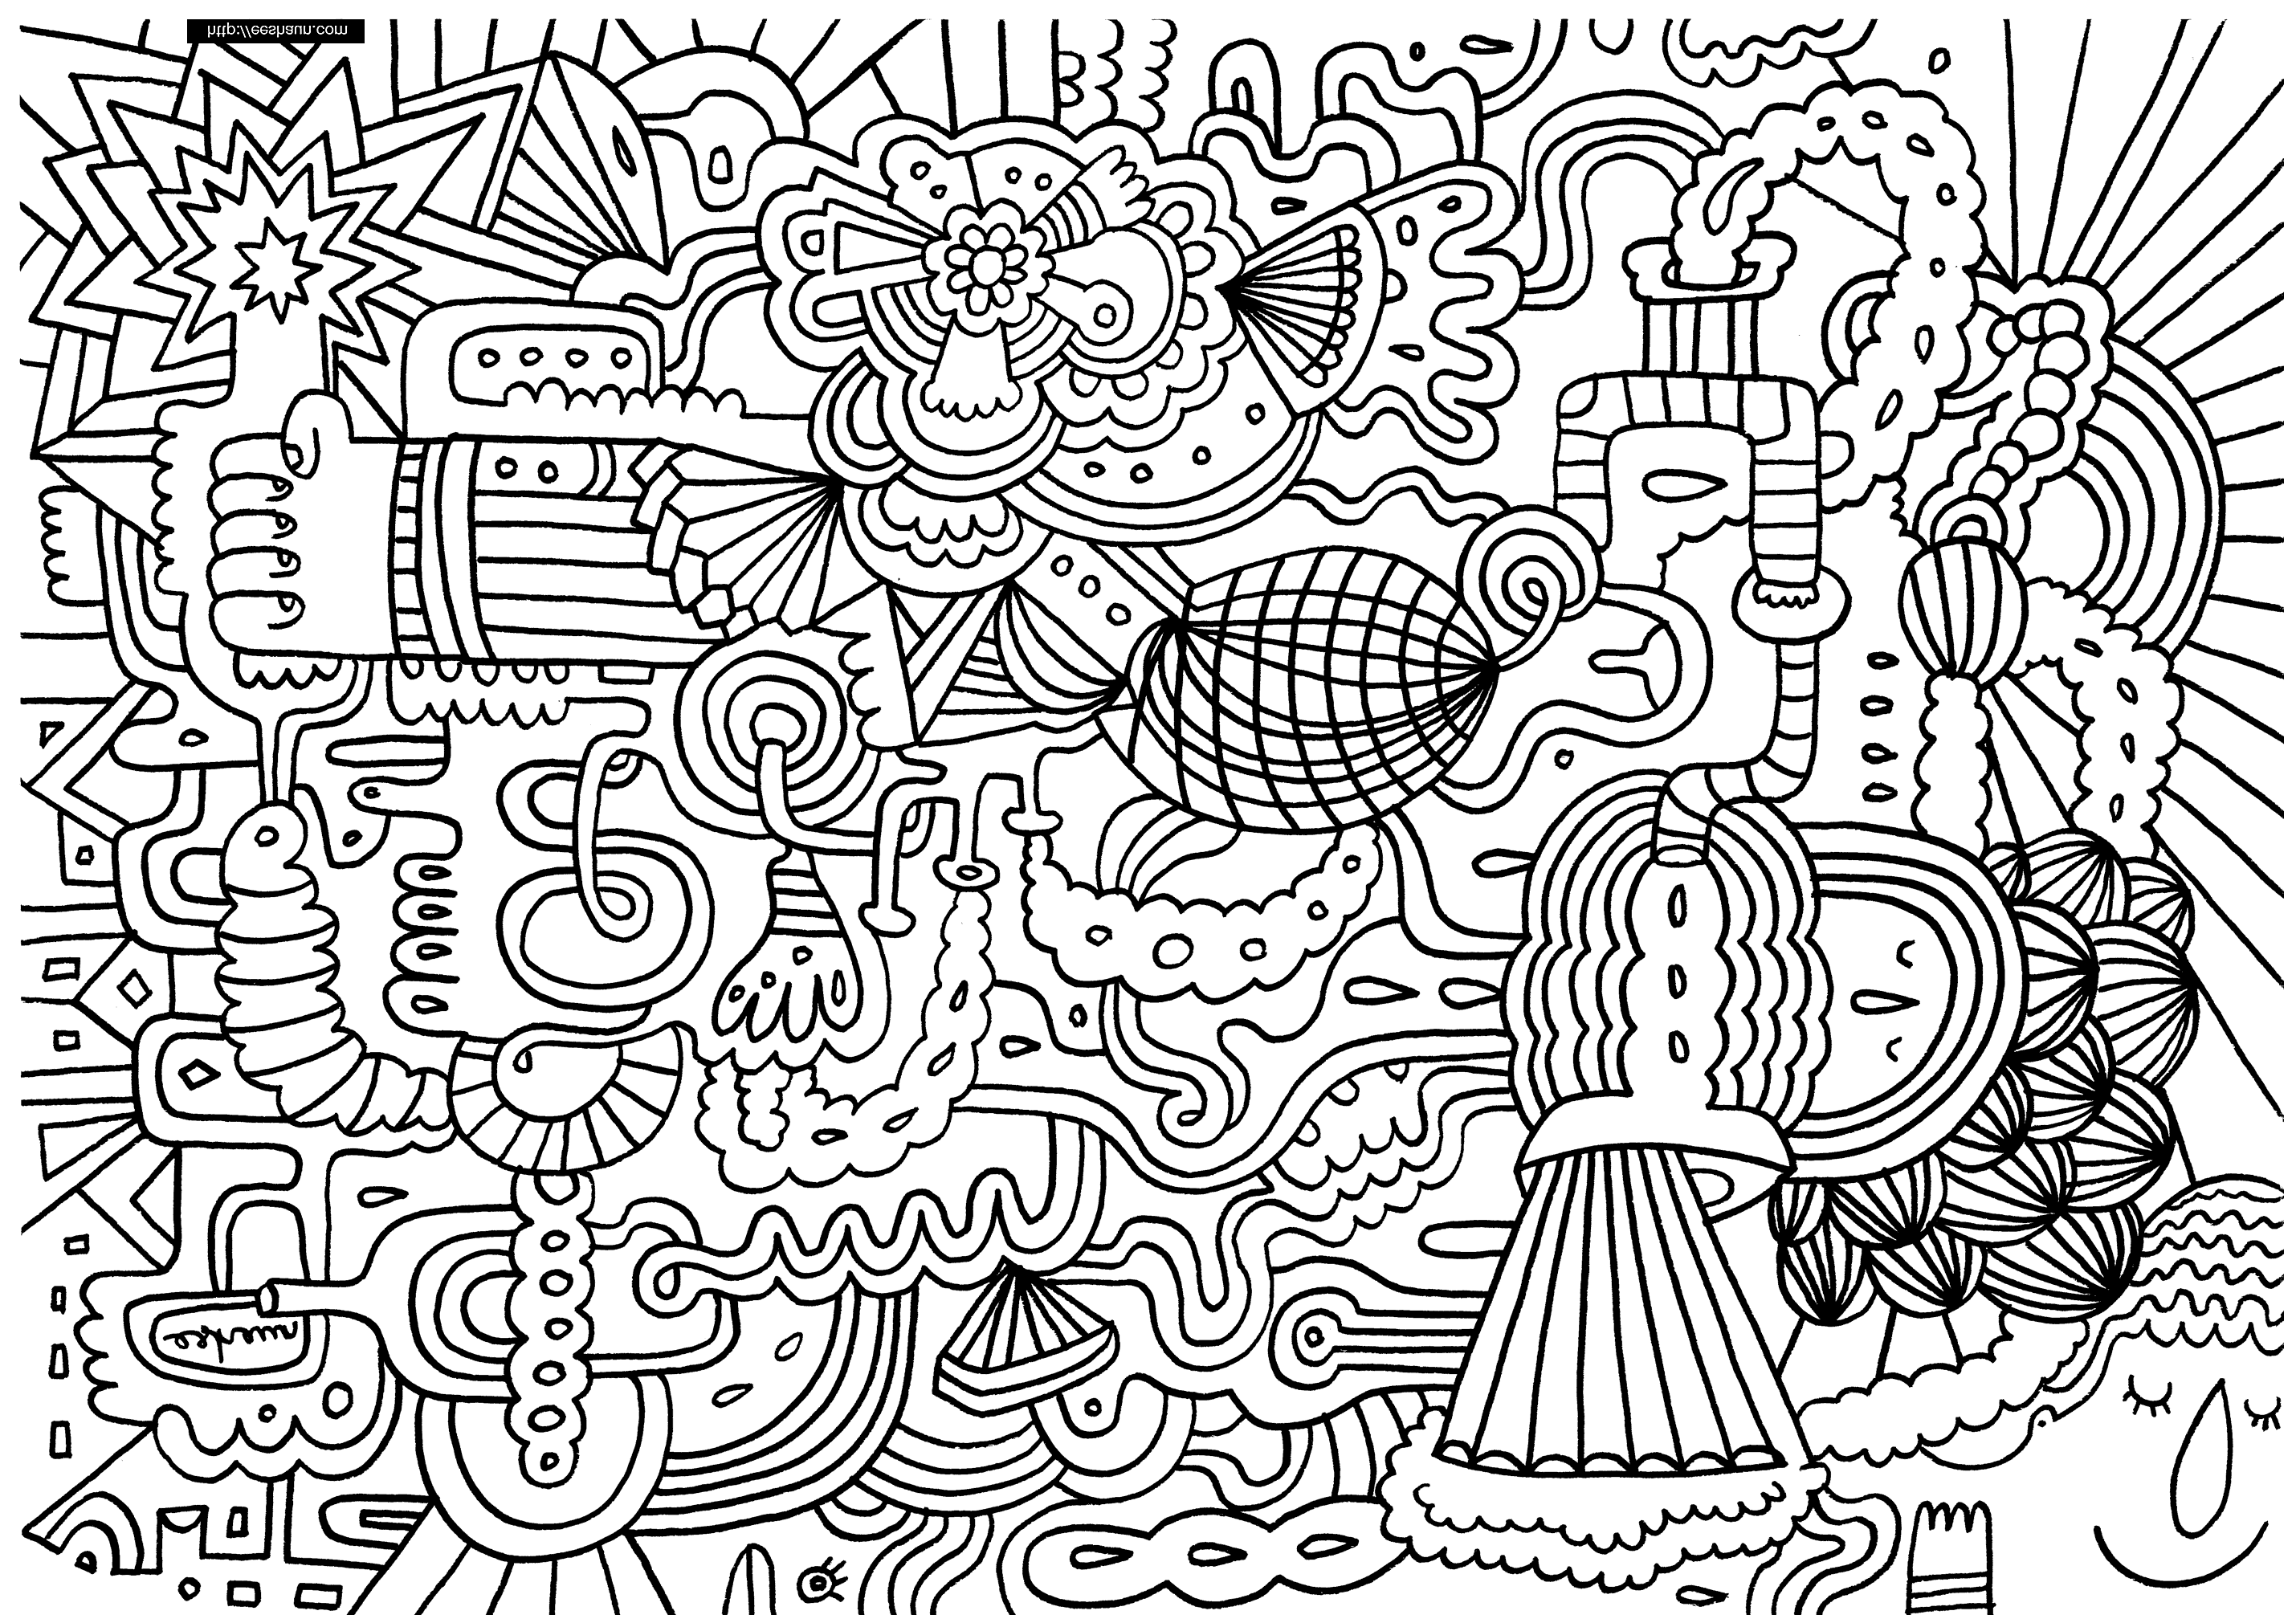 Doodle art doodling 2   Doodle Art / Doodling Adult Coloring Pages